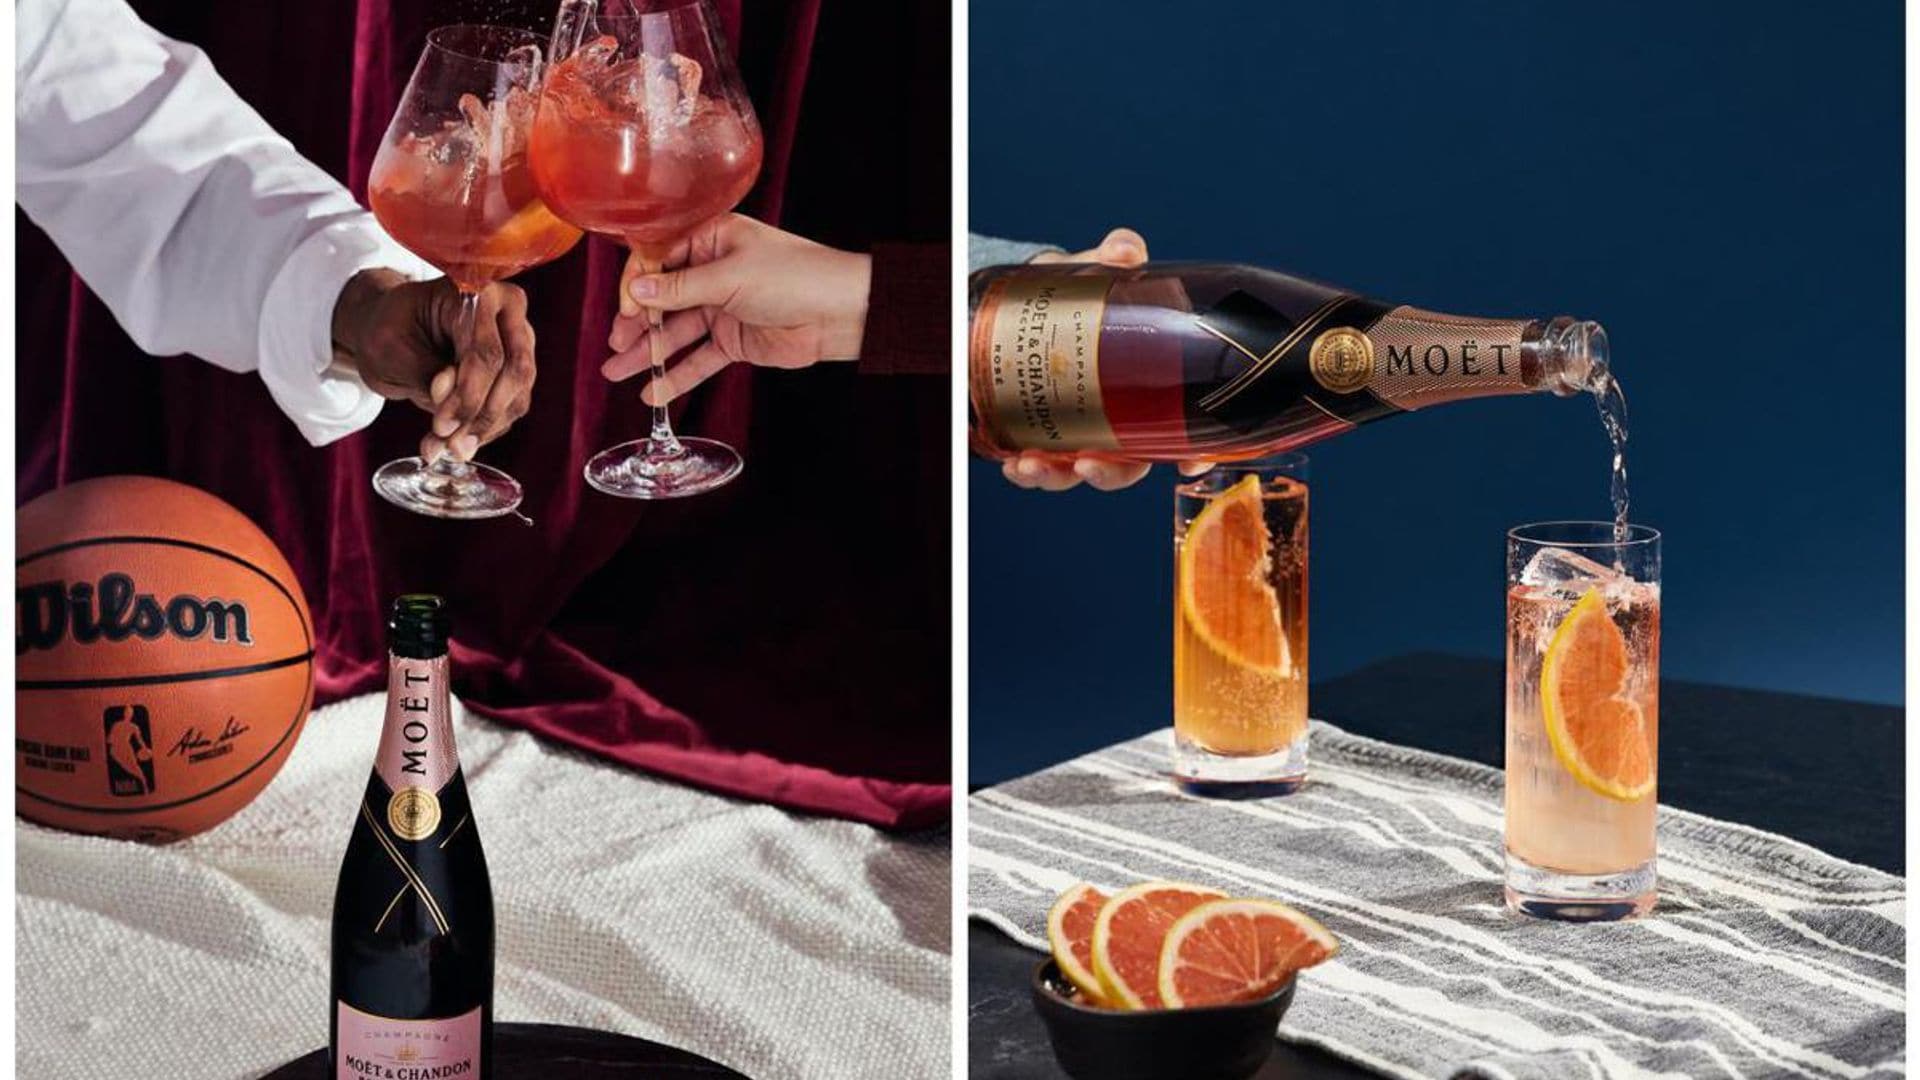 Moet & Chandon is the official champagne of the NBA, partnered with 6 NBA teams to craft a special signature cocktail collection